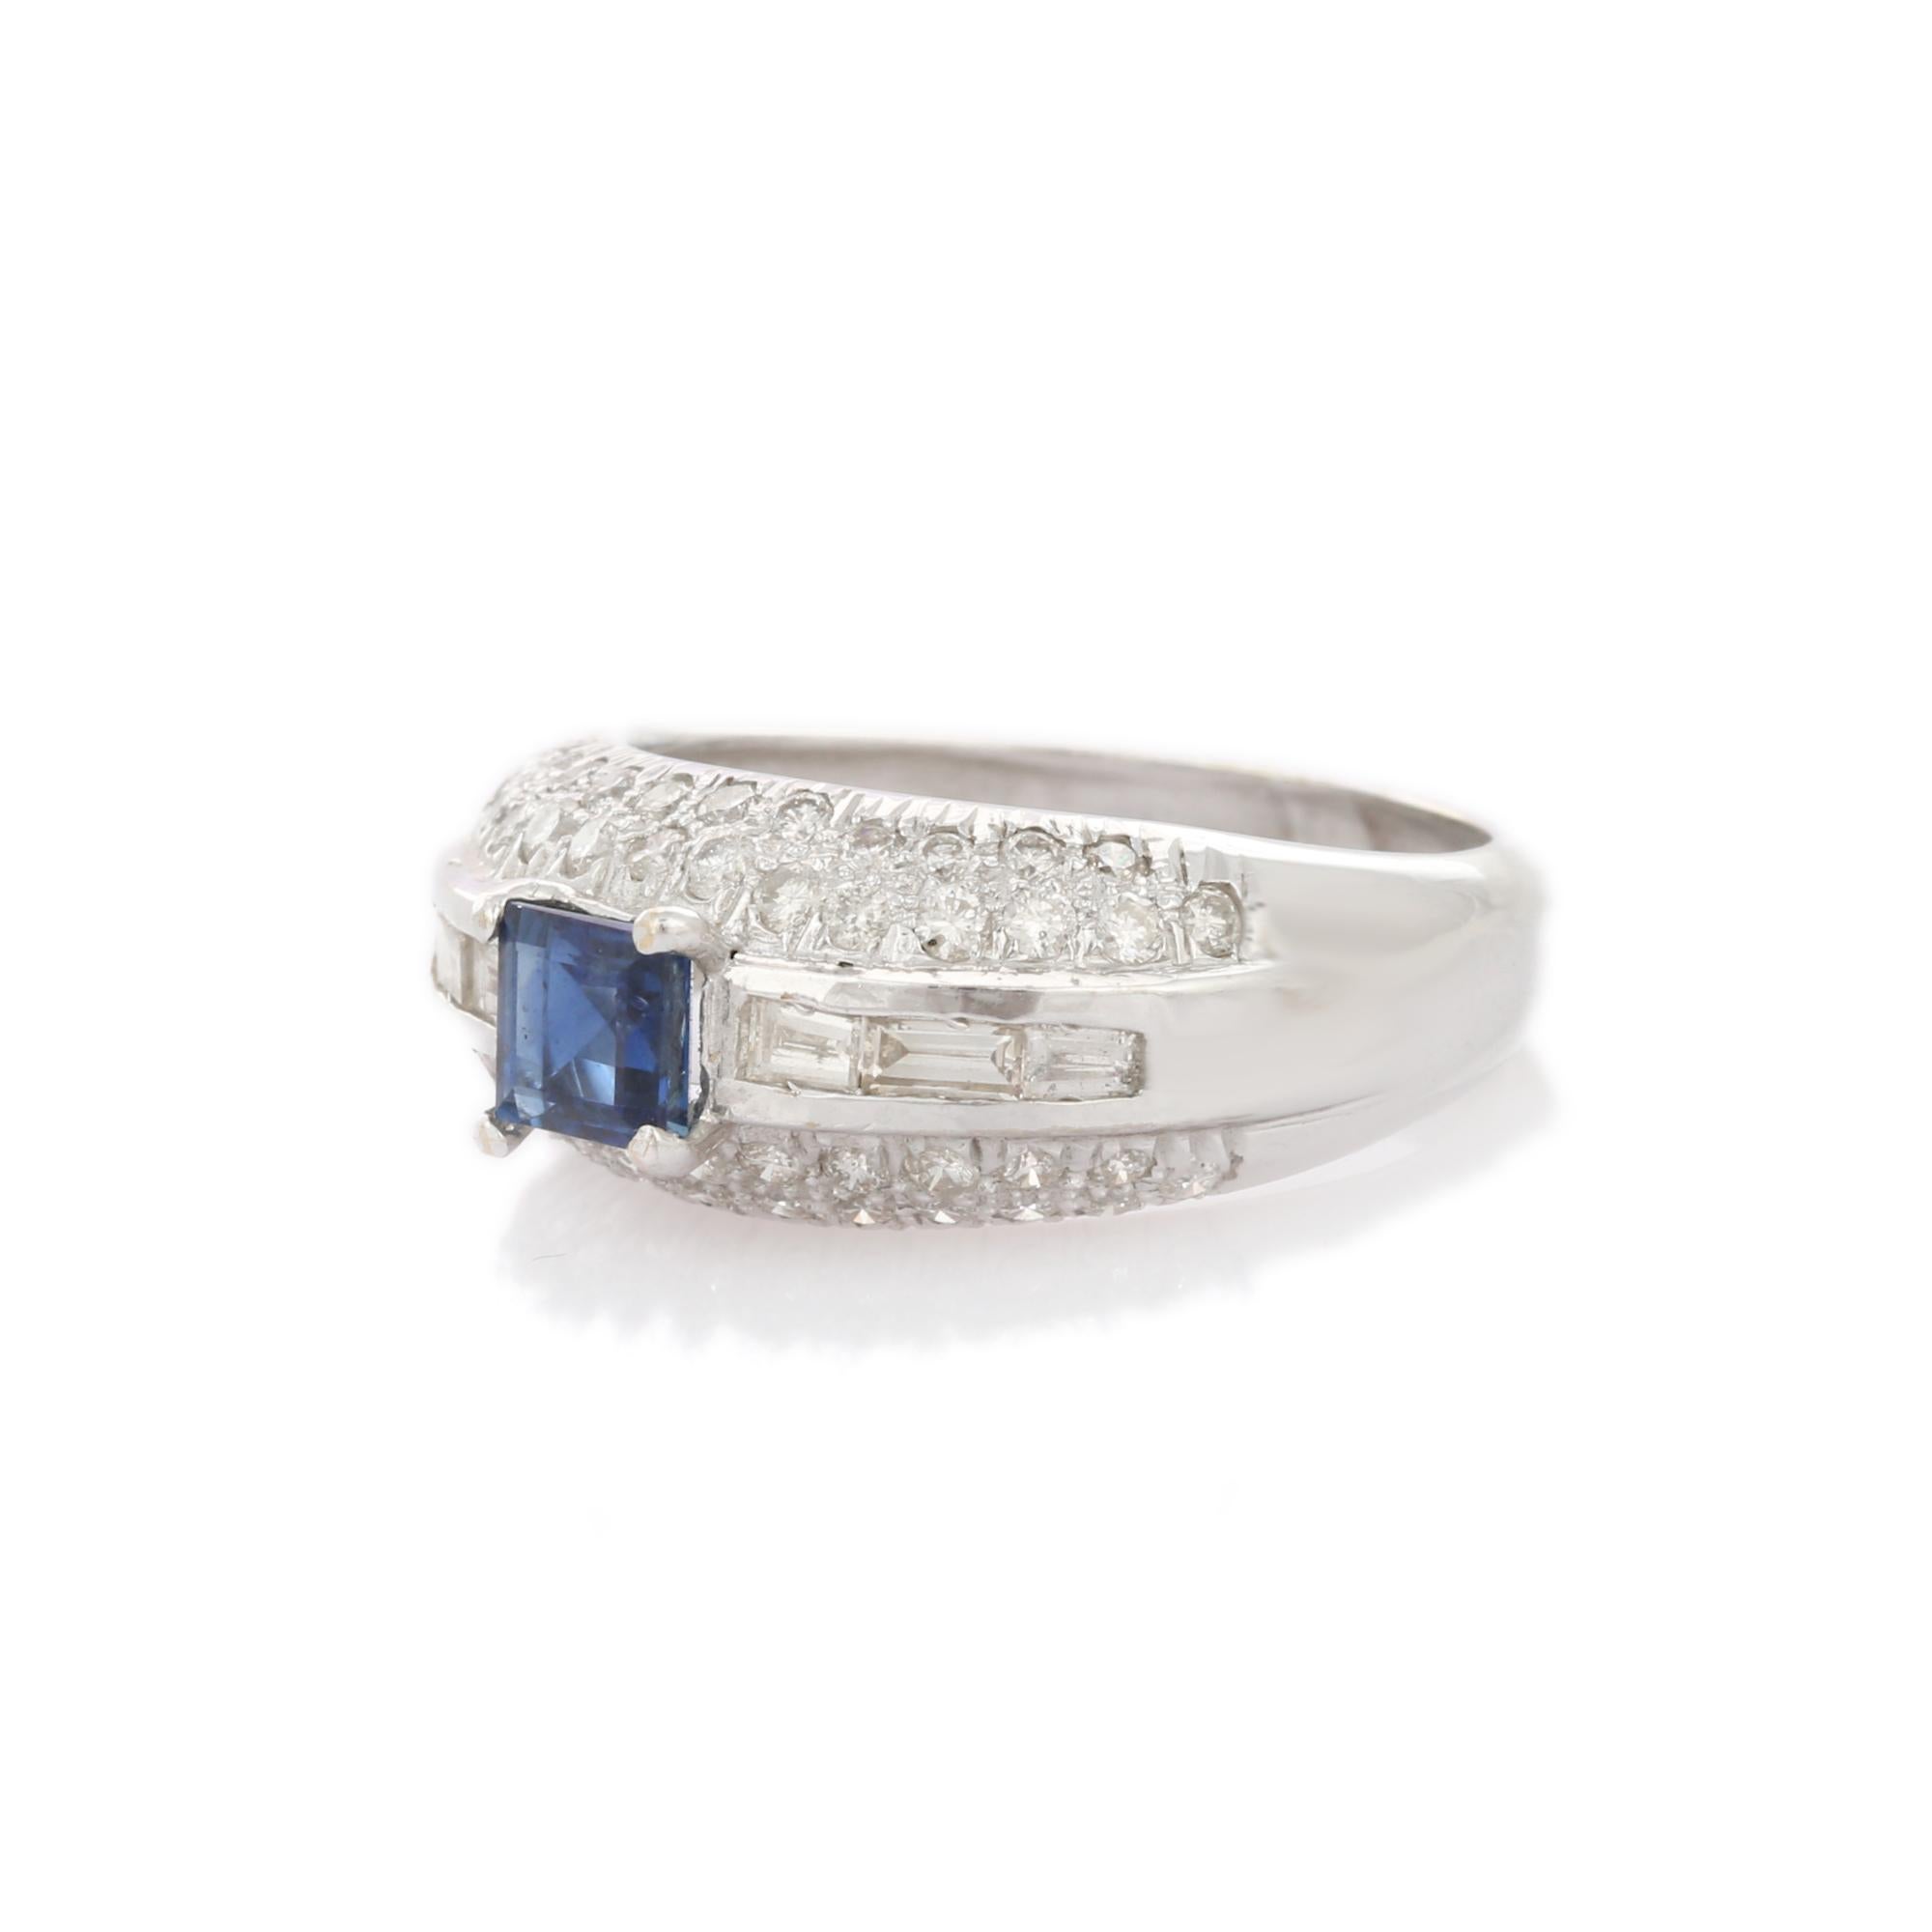 For Sale:  18K White Gold Square Cut Blue Sapphire and Diamonds Cocktail Ring 3